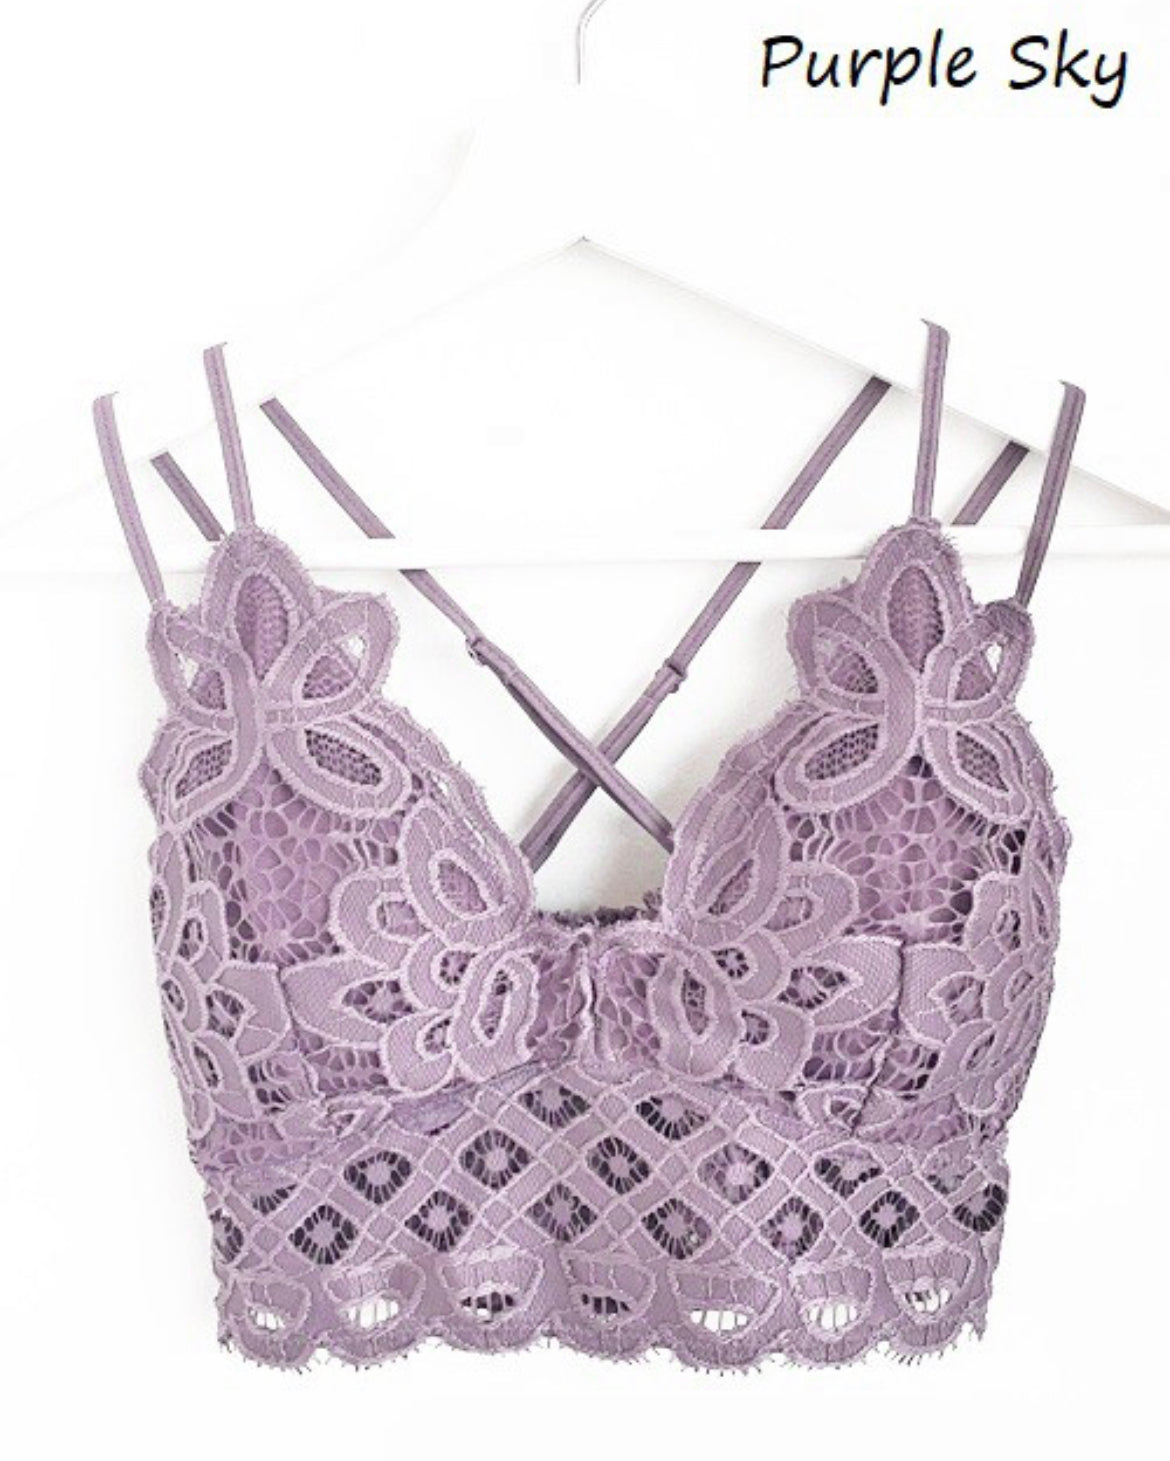 LACE BRALETTE IN PURPLE SKY-BRALETTE-MODE-Couture-Boutique-Womens-Clothing